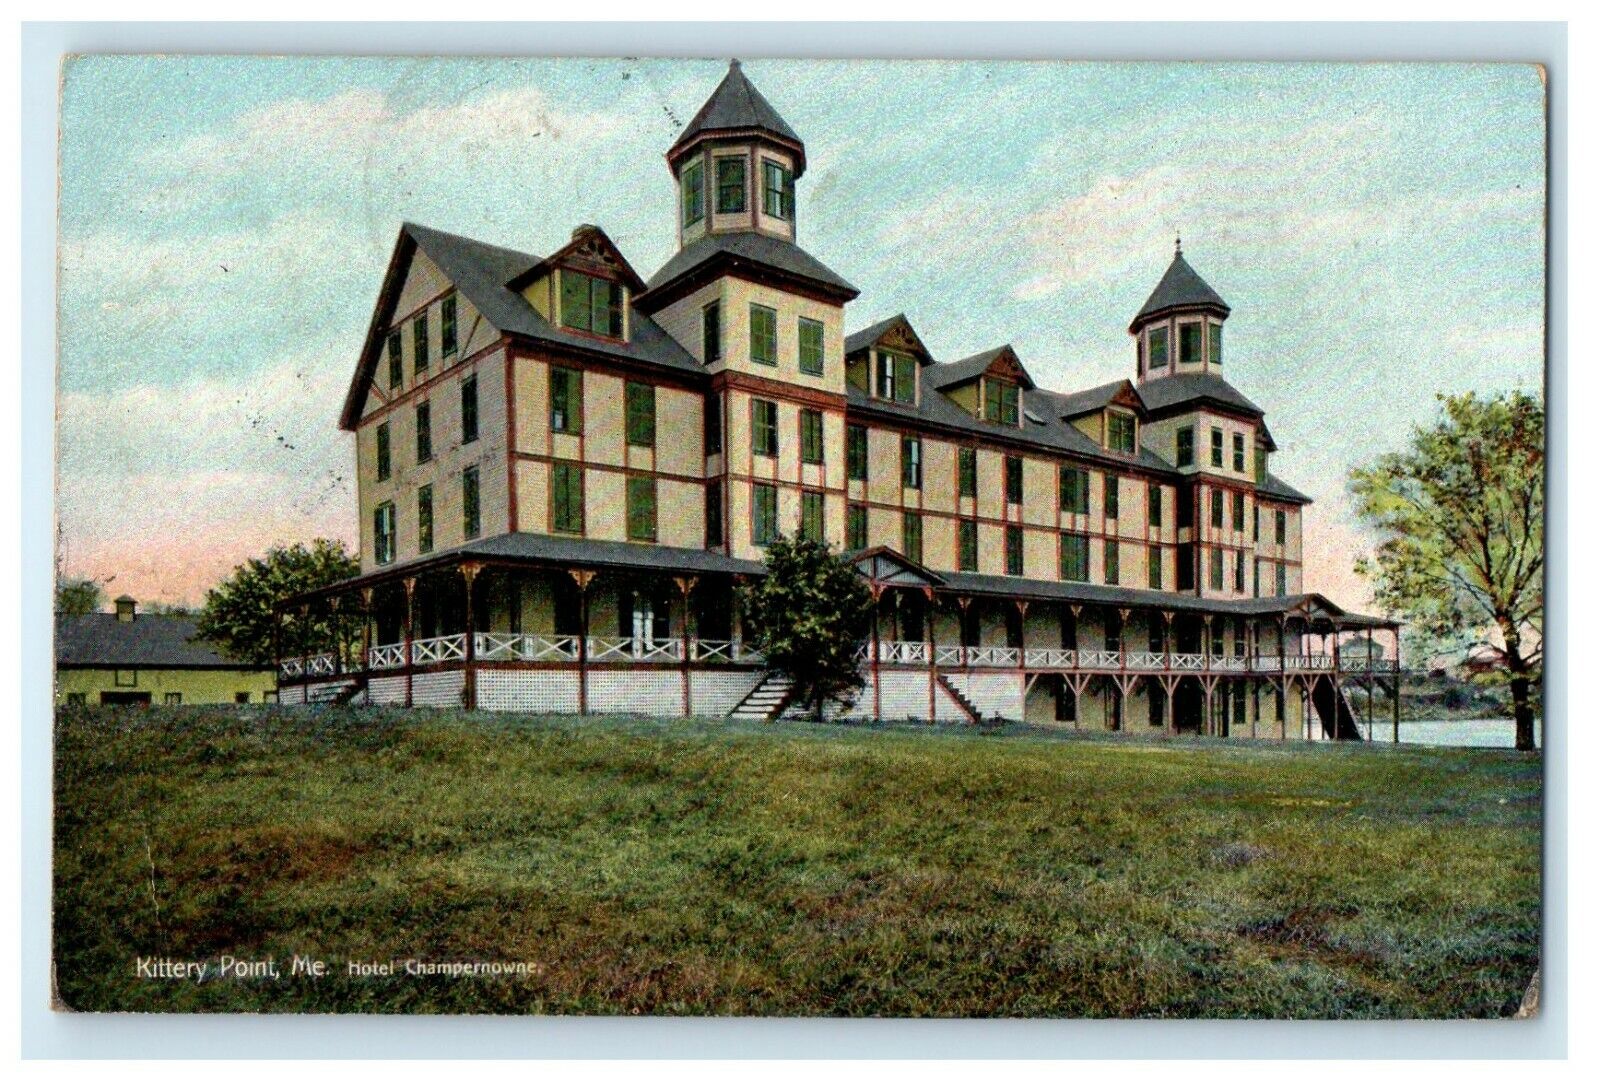 1910 Hotel Champernowne, Kittery Point, Maine ME Antique Posted Postcard